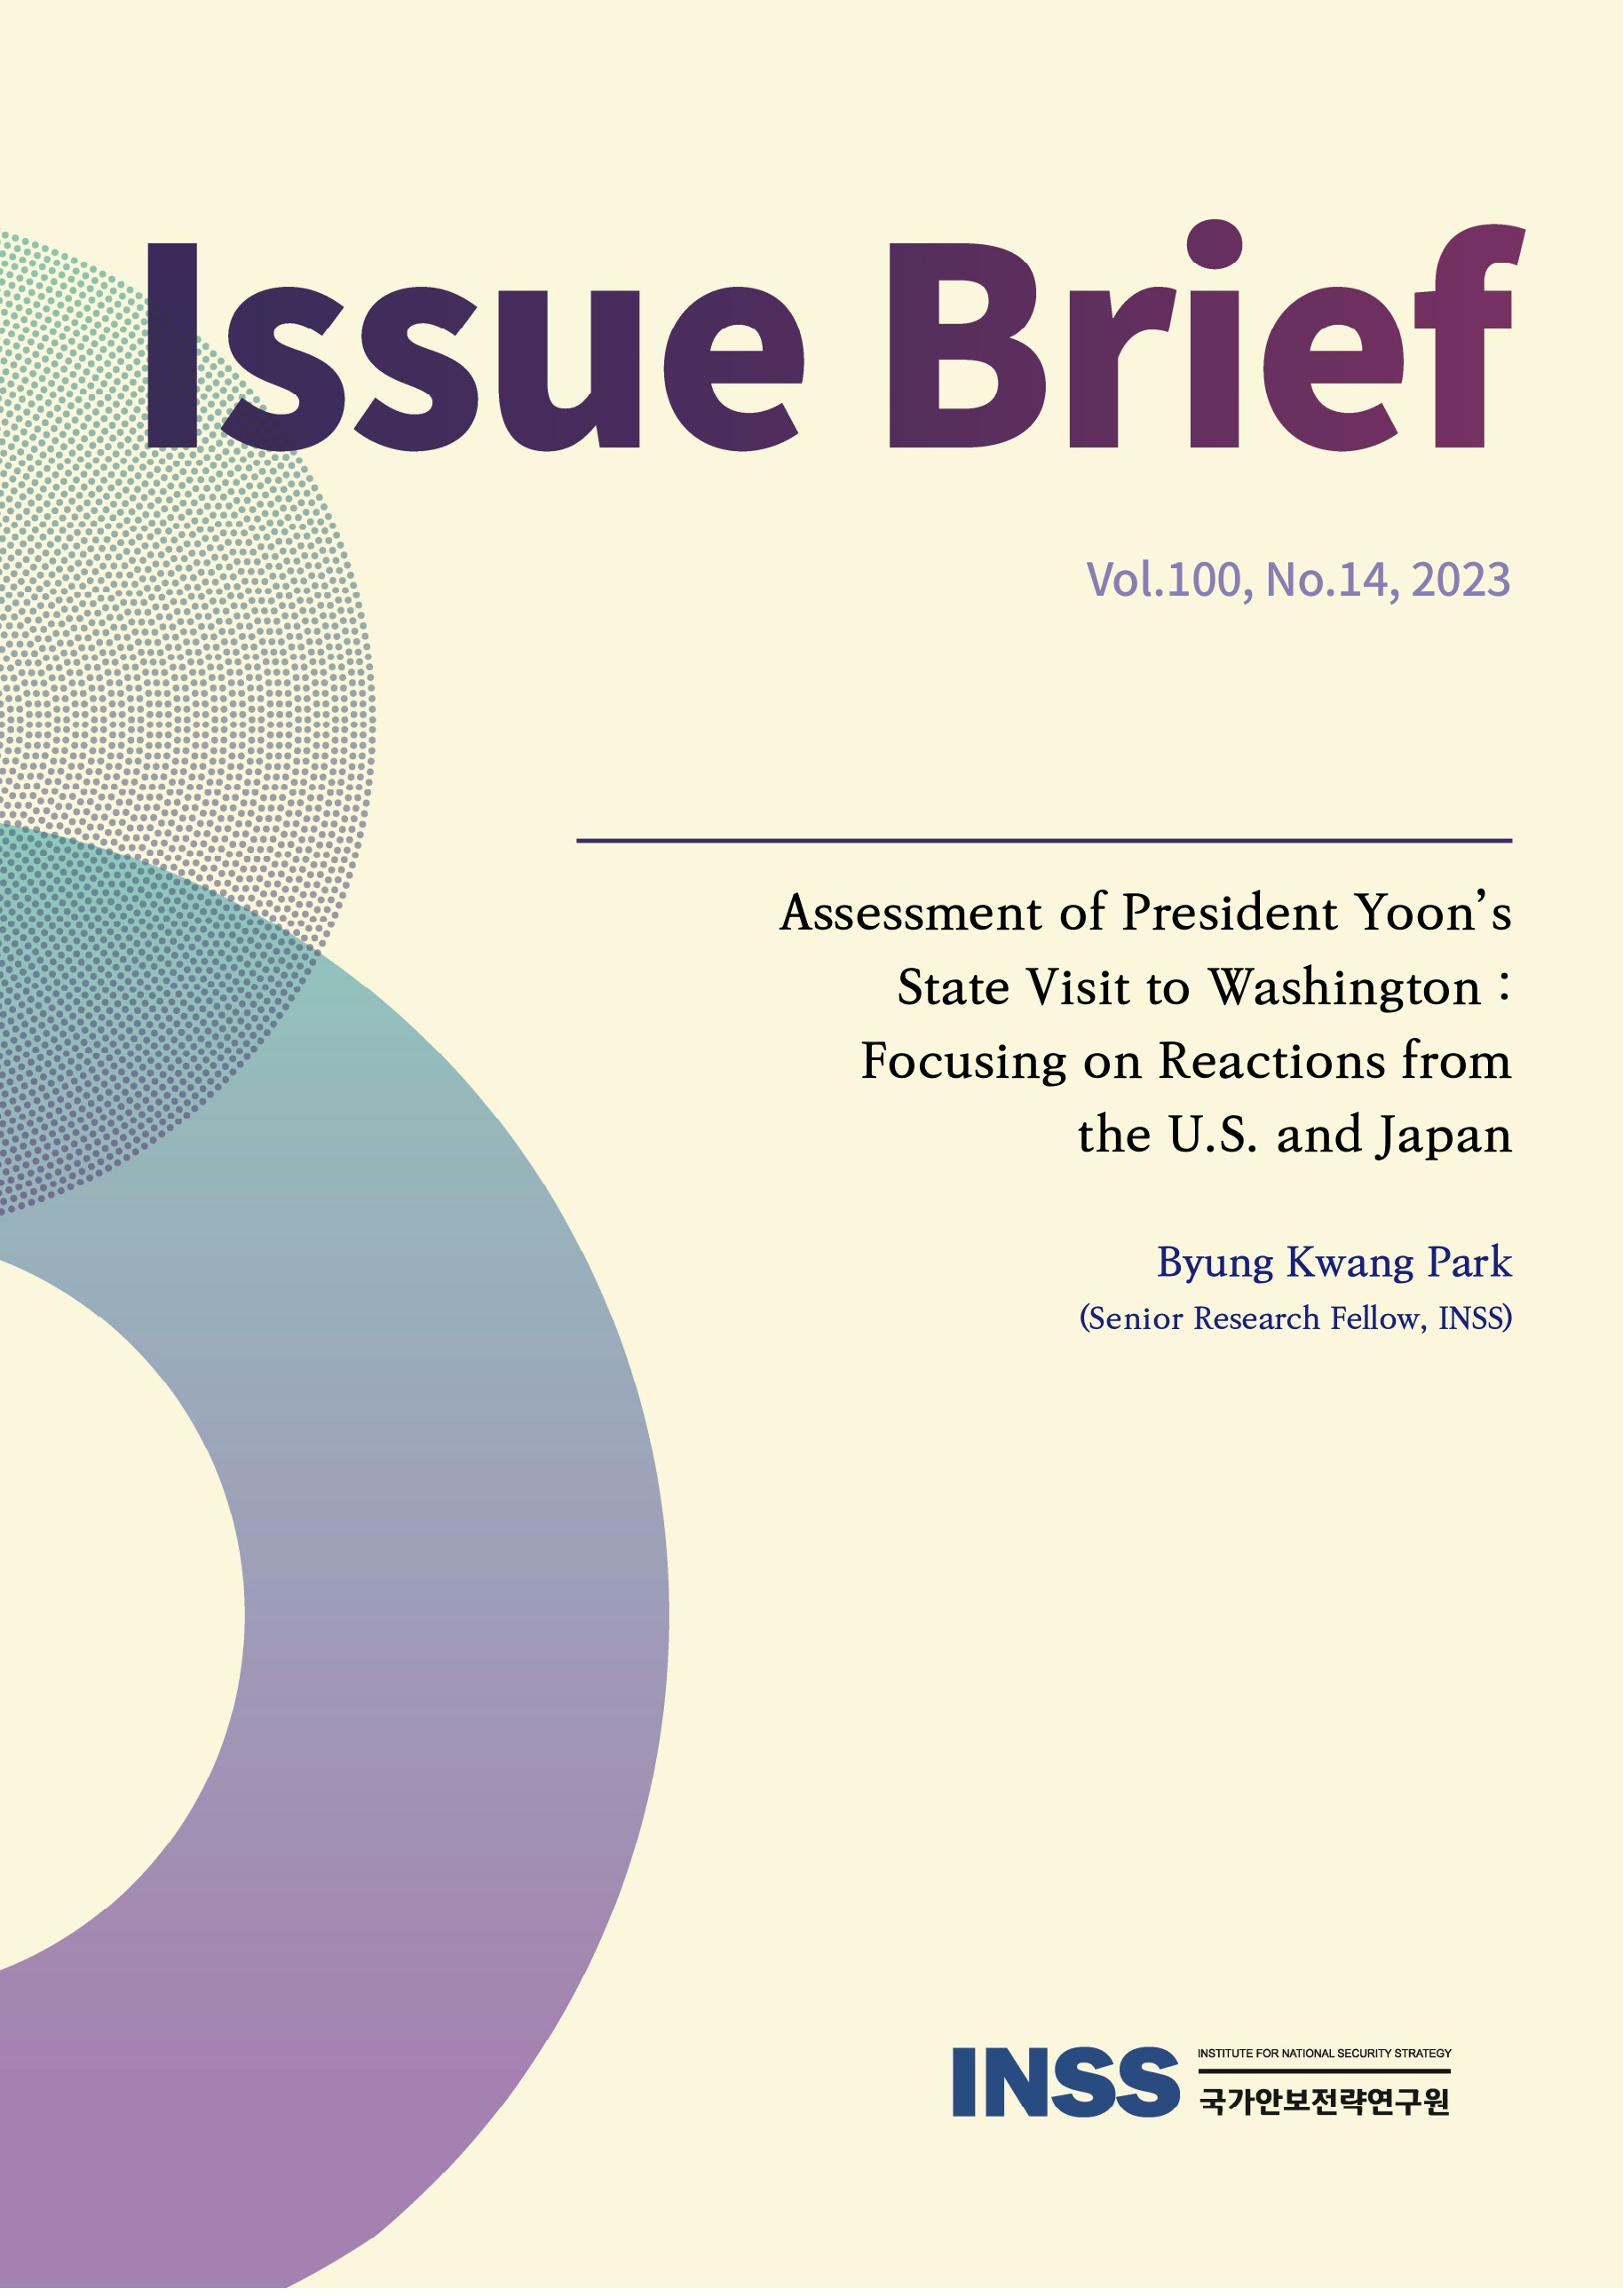 Assessment of President Yoon's State Visit to Washington